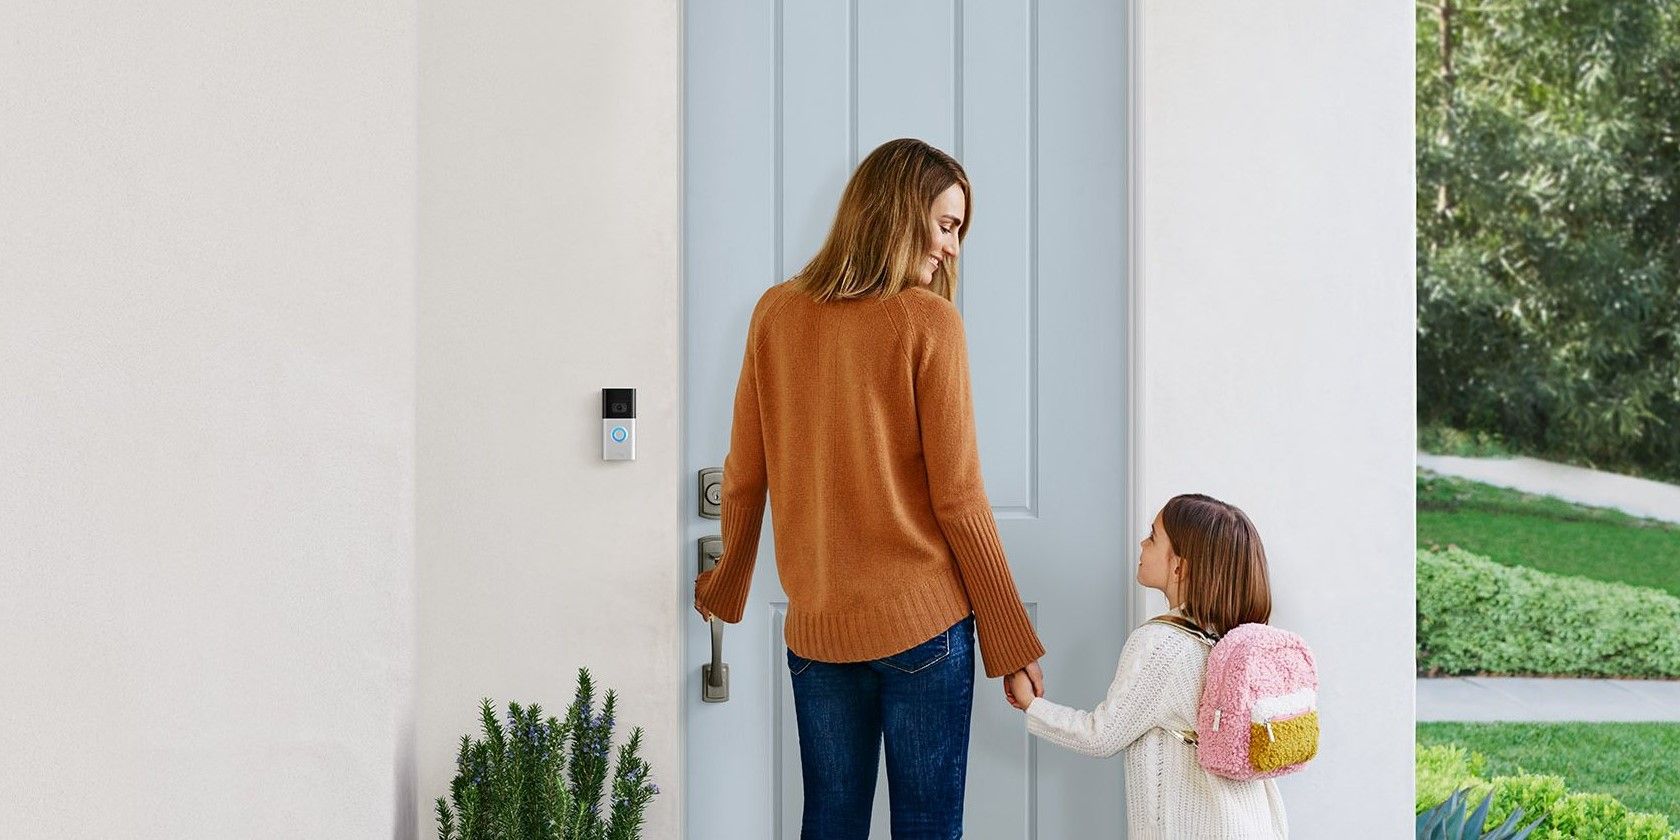 Woman and girl ring doorbell